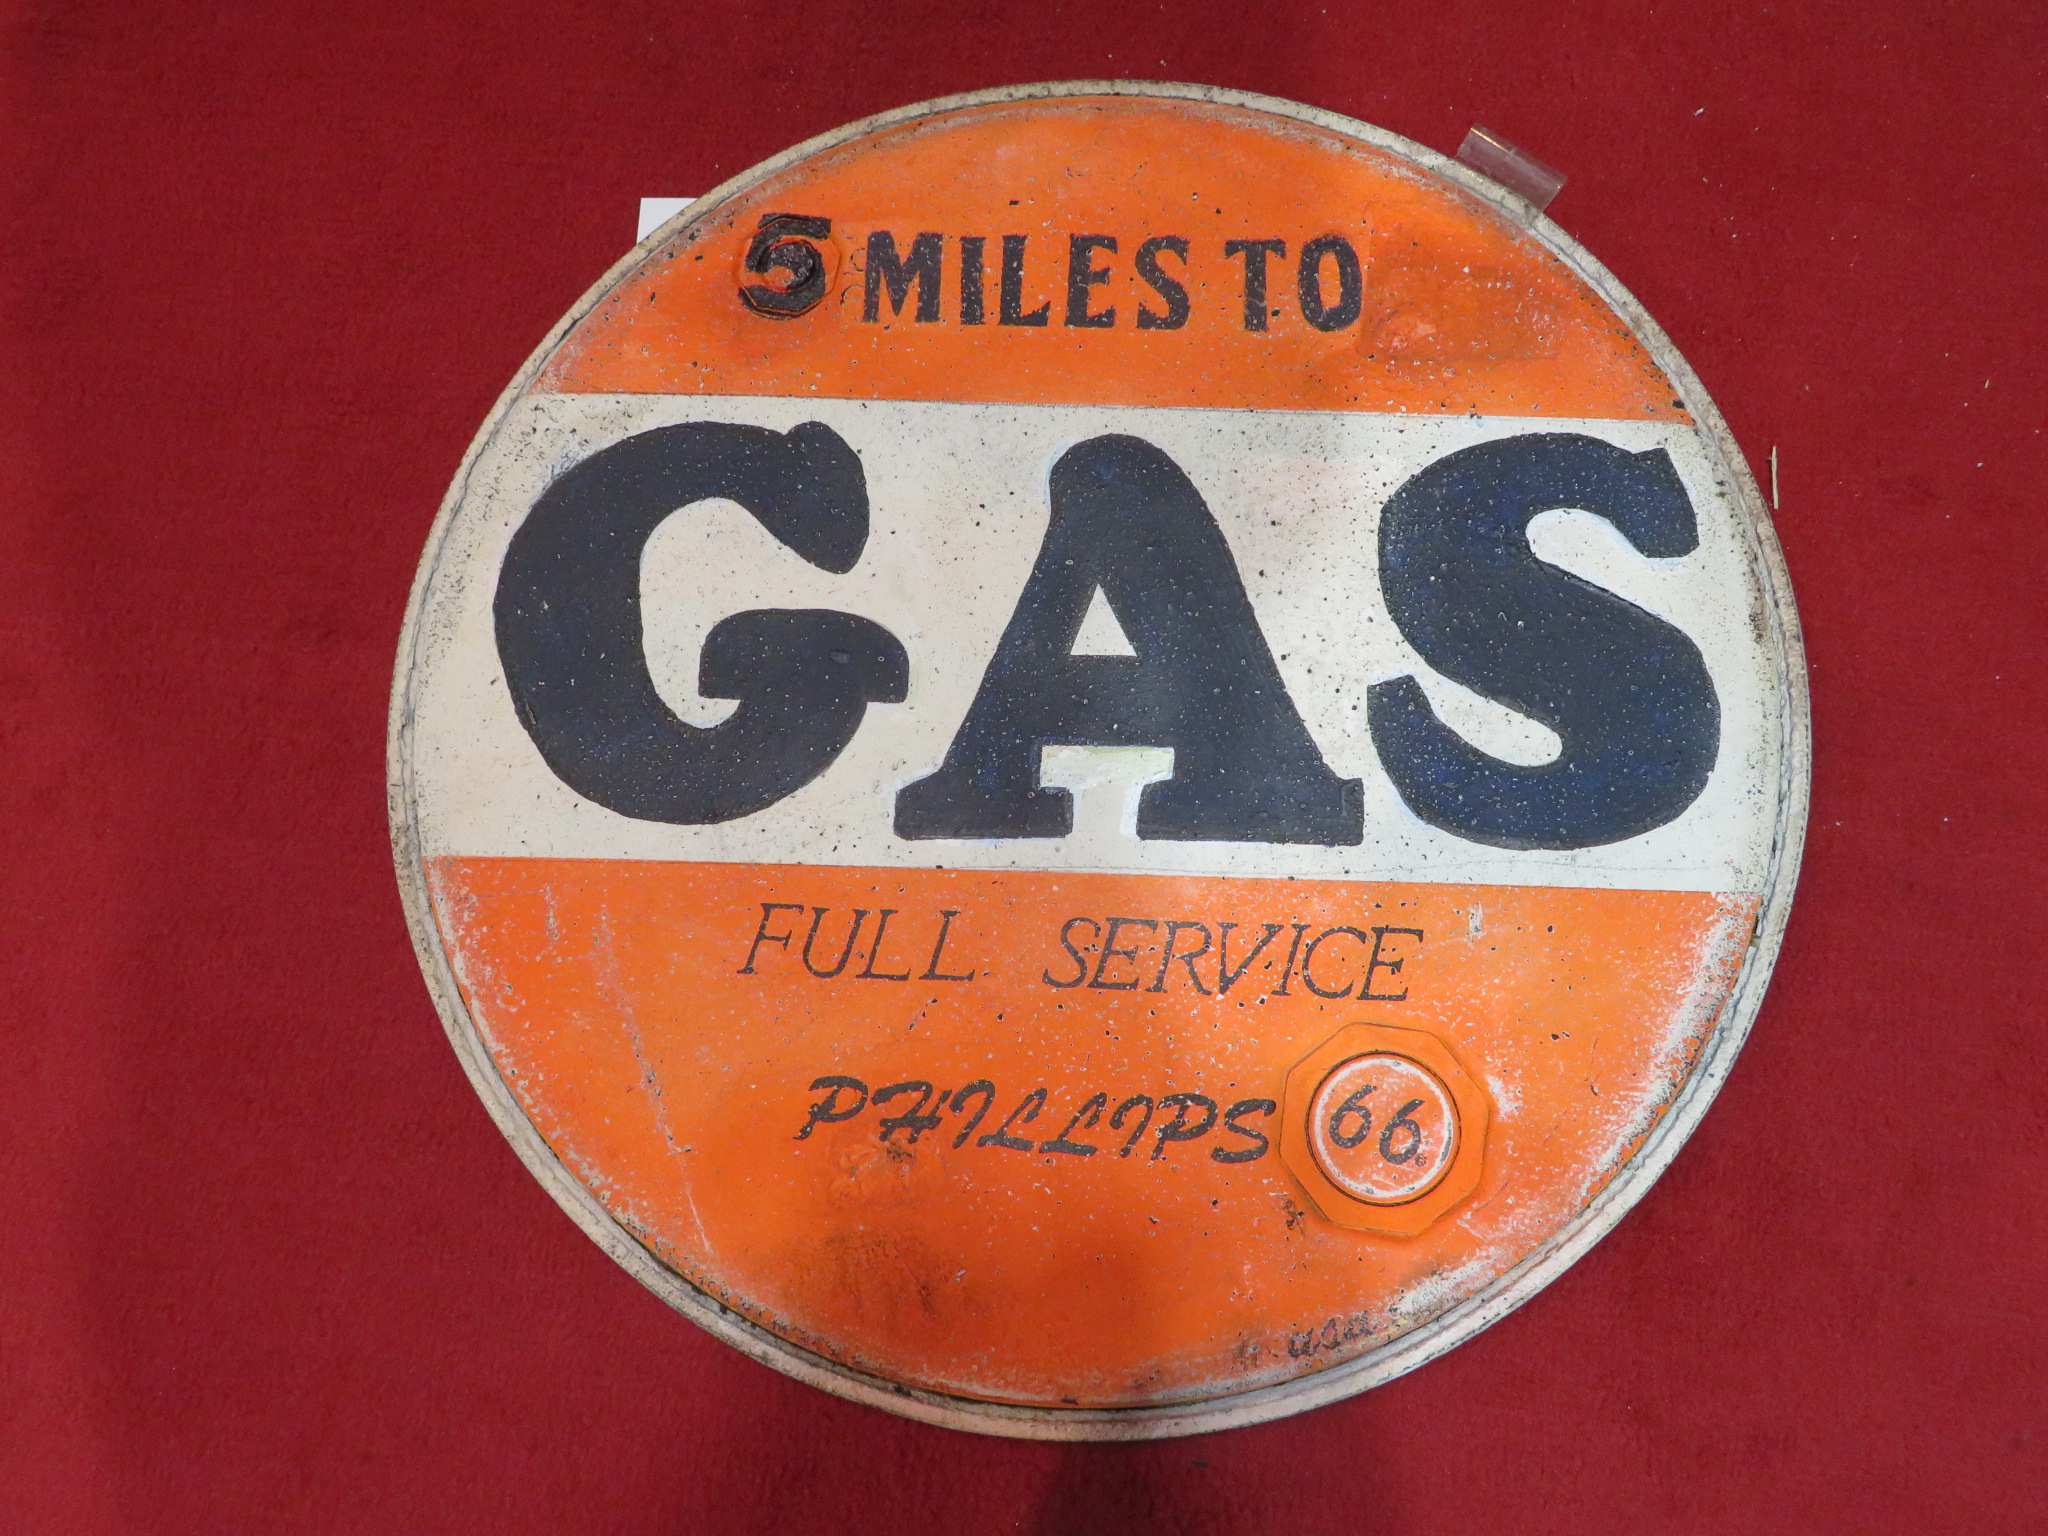 0th Image of a N/A N/A 5 MILES TO GAS FULL SERVICE PHILLIPS 66